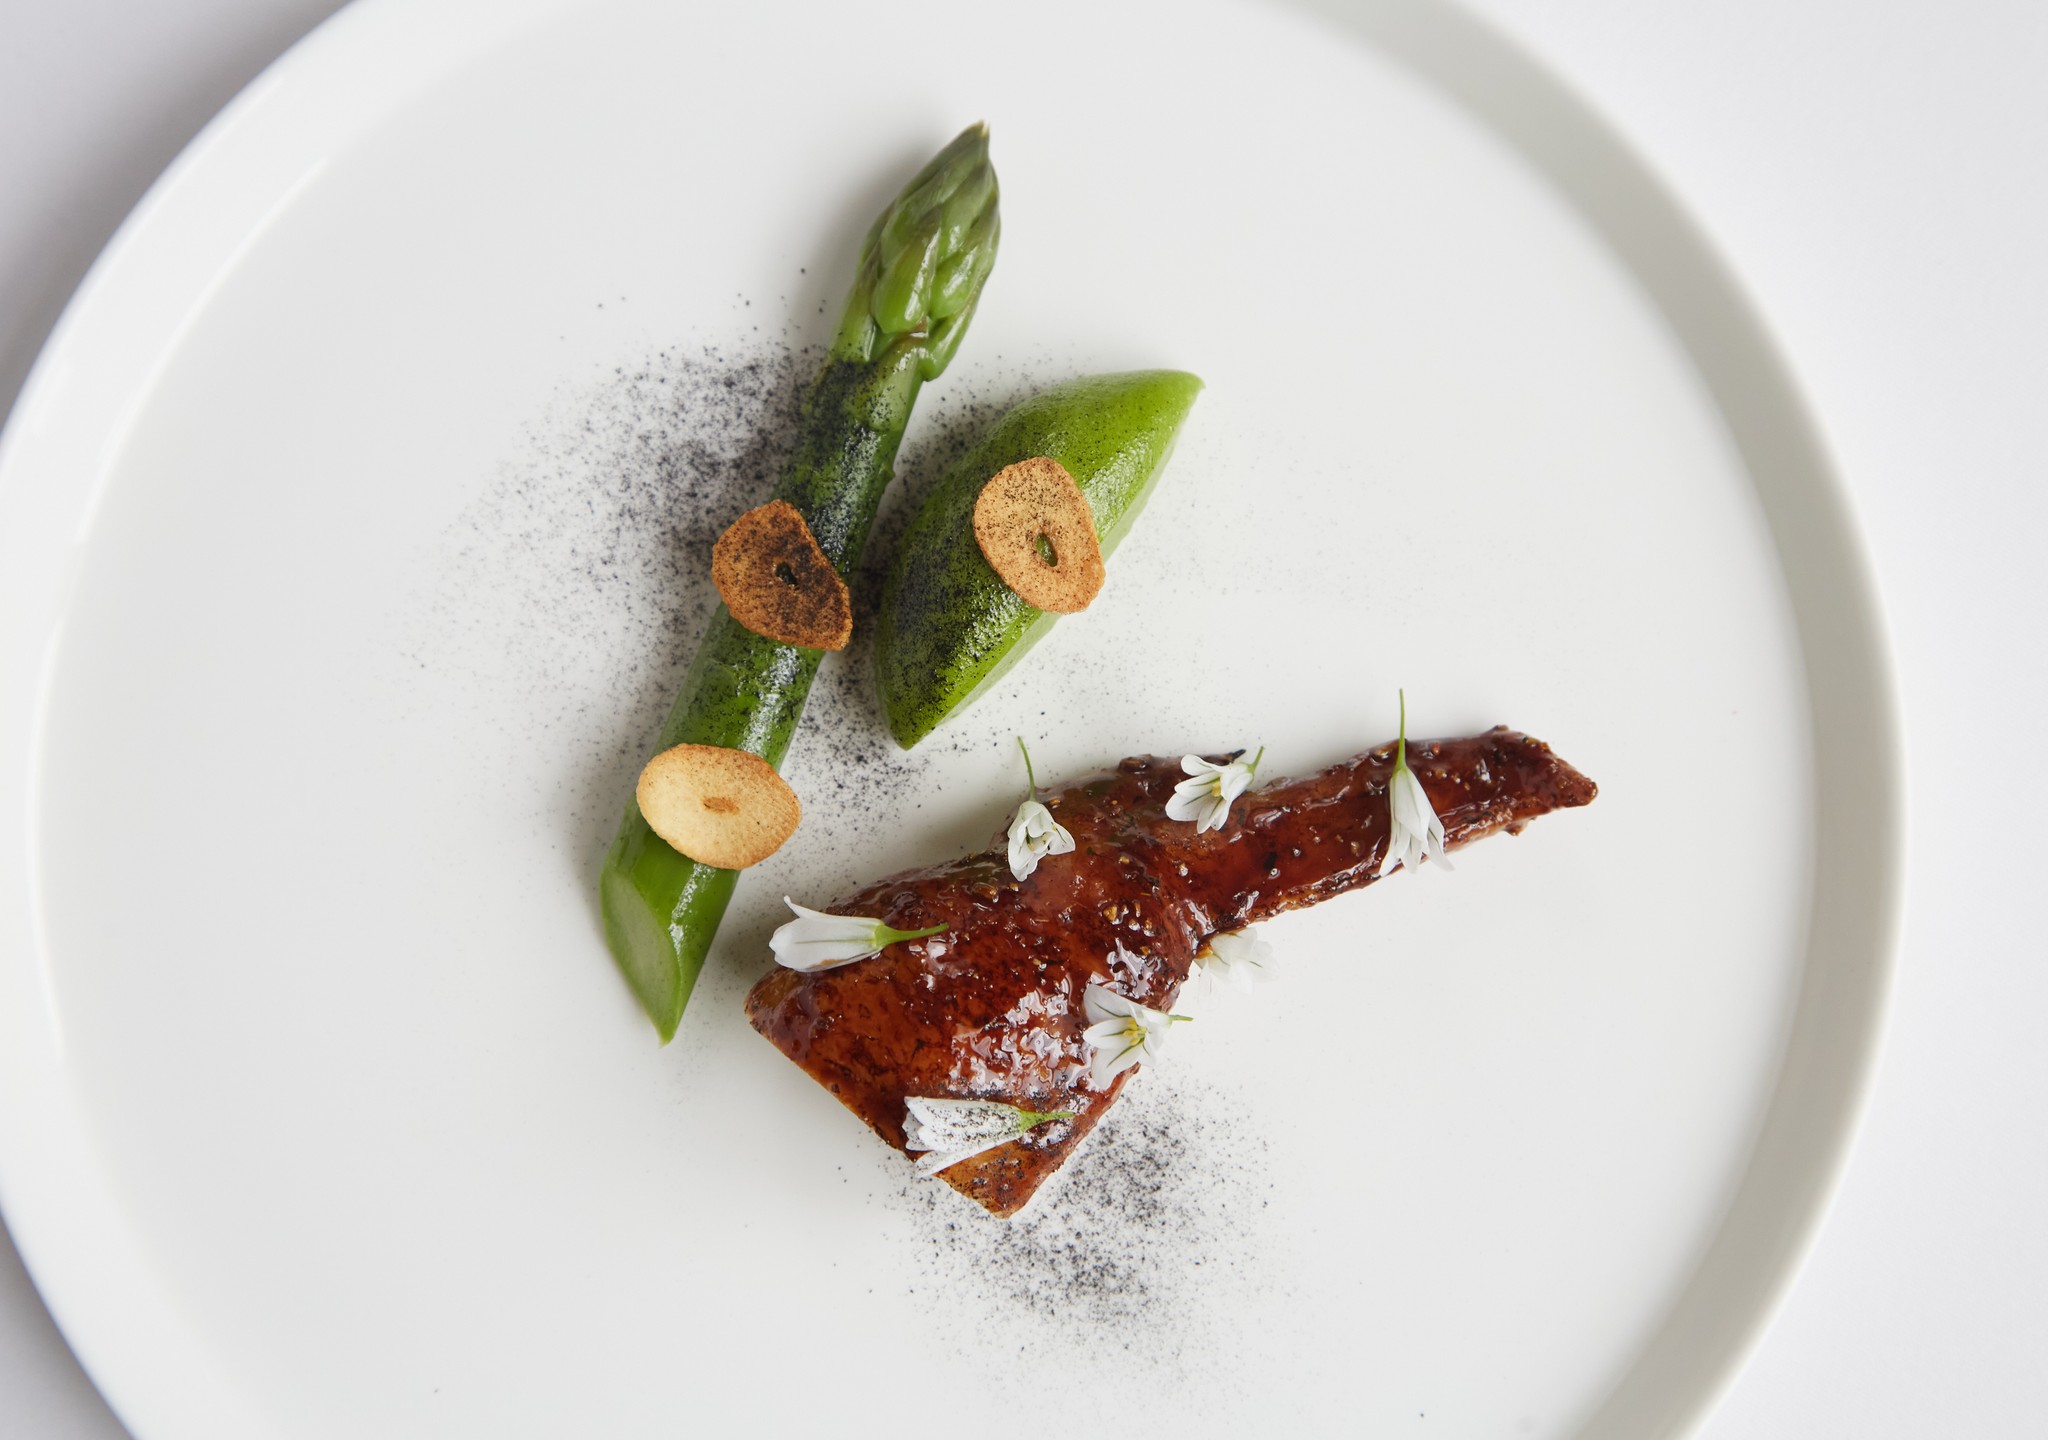 Overhead shot of Cumbrian chicken wing with asparagus and wild garlic from Marcus Restaurant